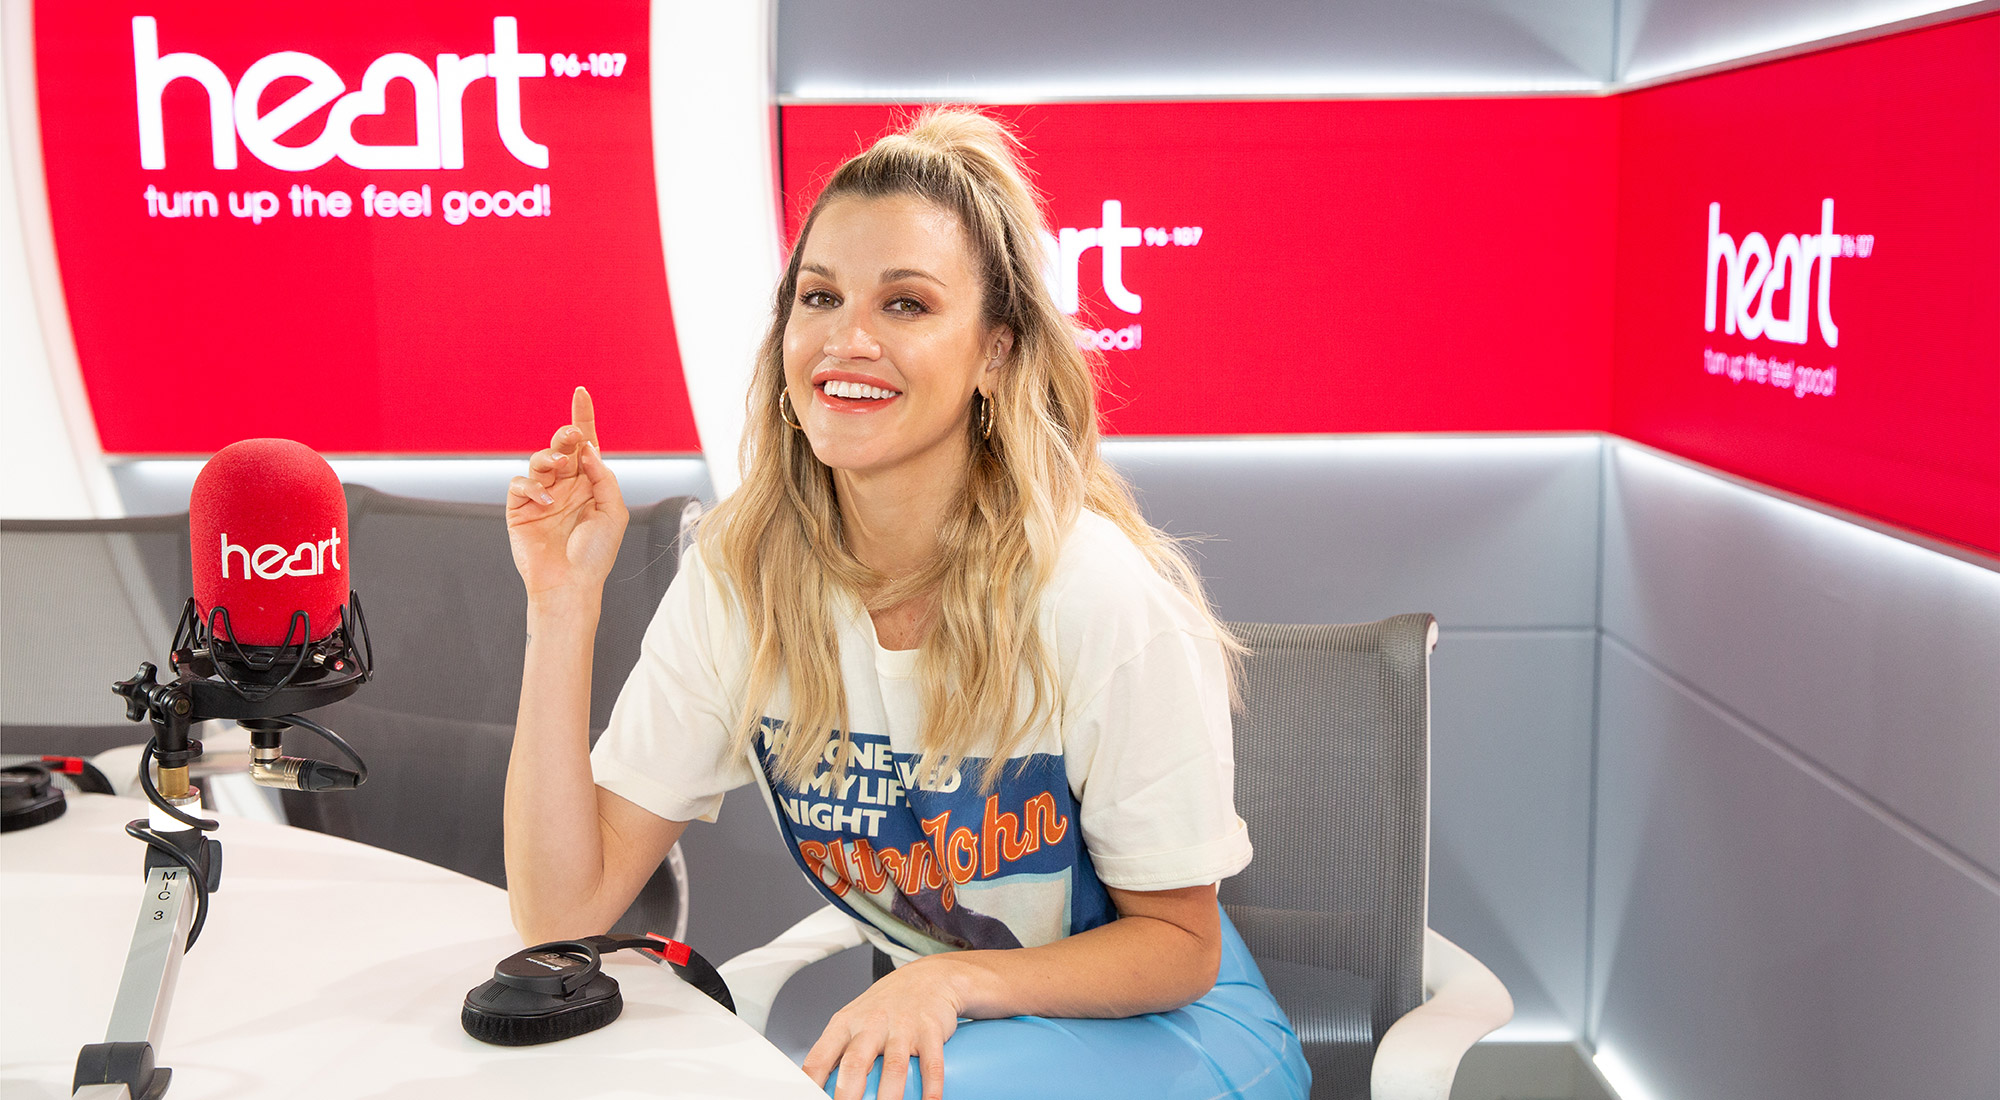 Ashley Roberts and Locksmith join Darcey Bussell and Tanni Grey-Thompson for countdown to National Fitness Day 2019